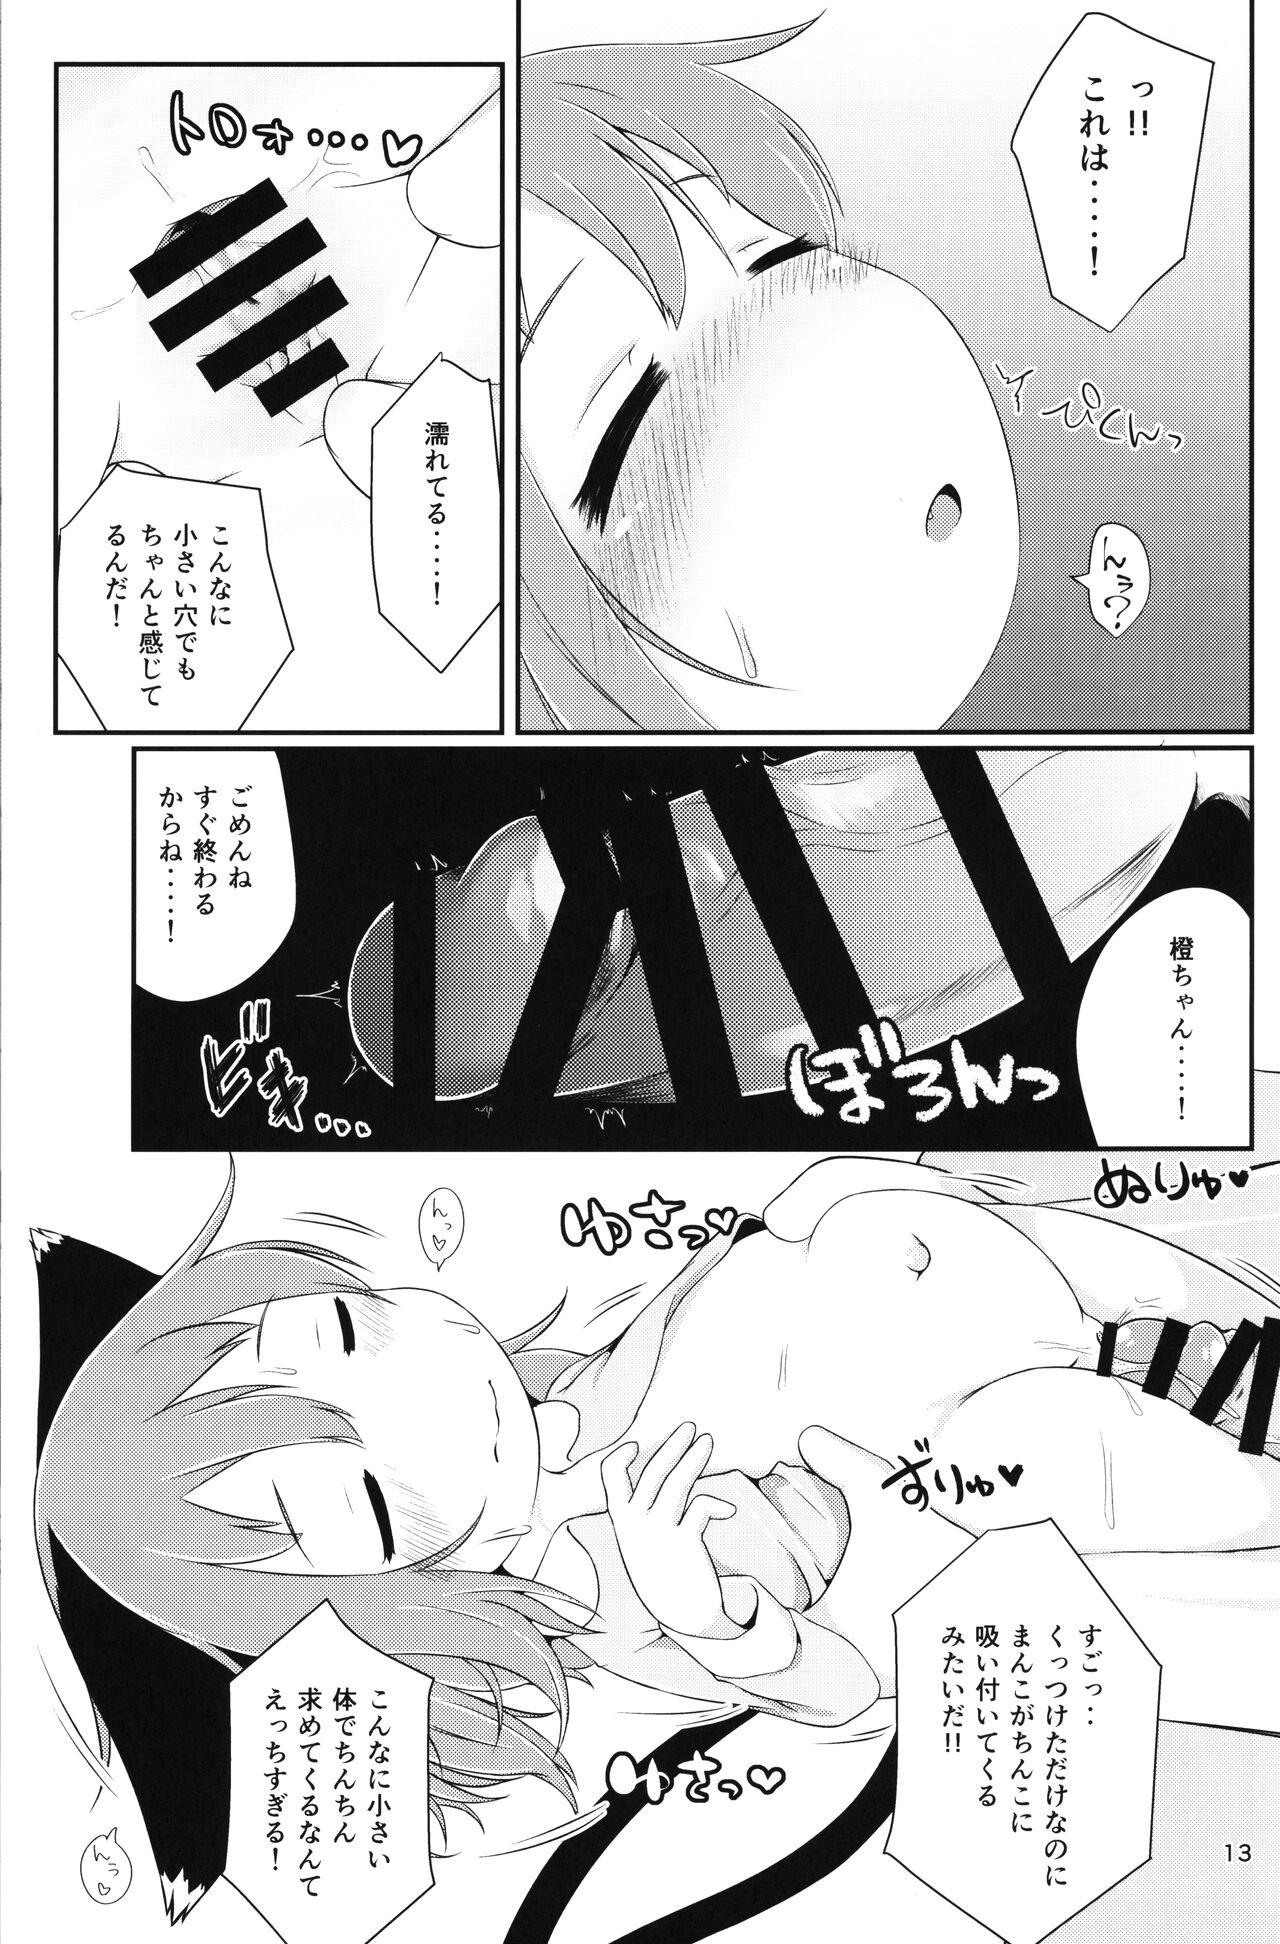 Old Man YouChen G - Touhou project Camgirl - Page 13